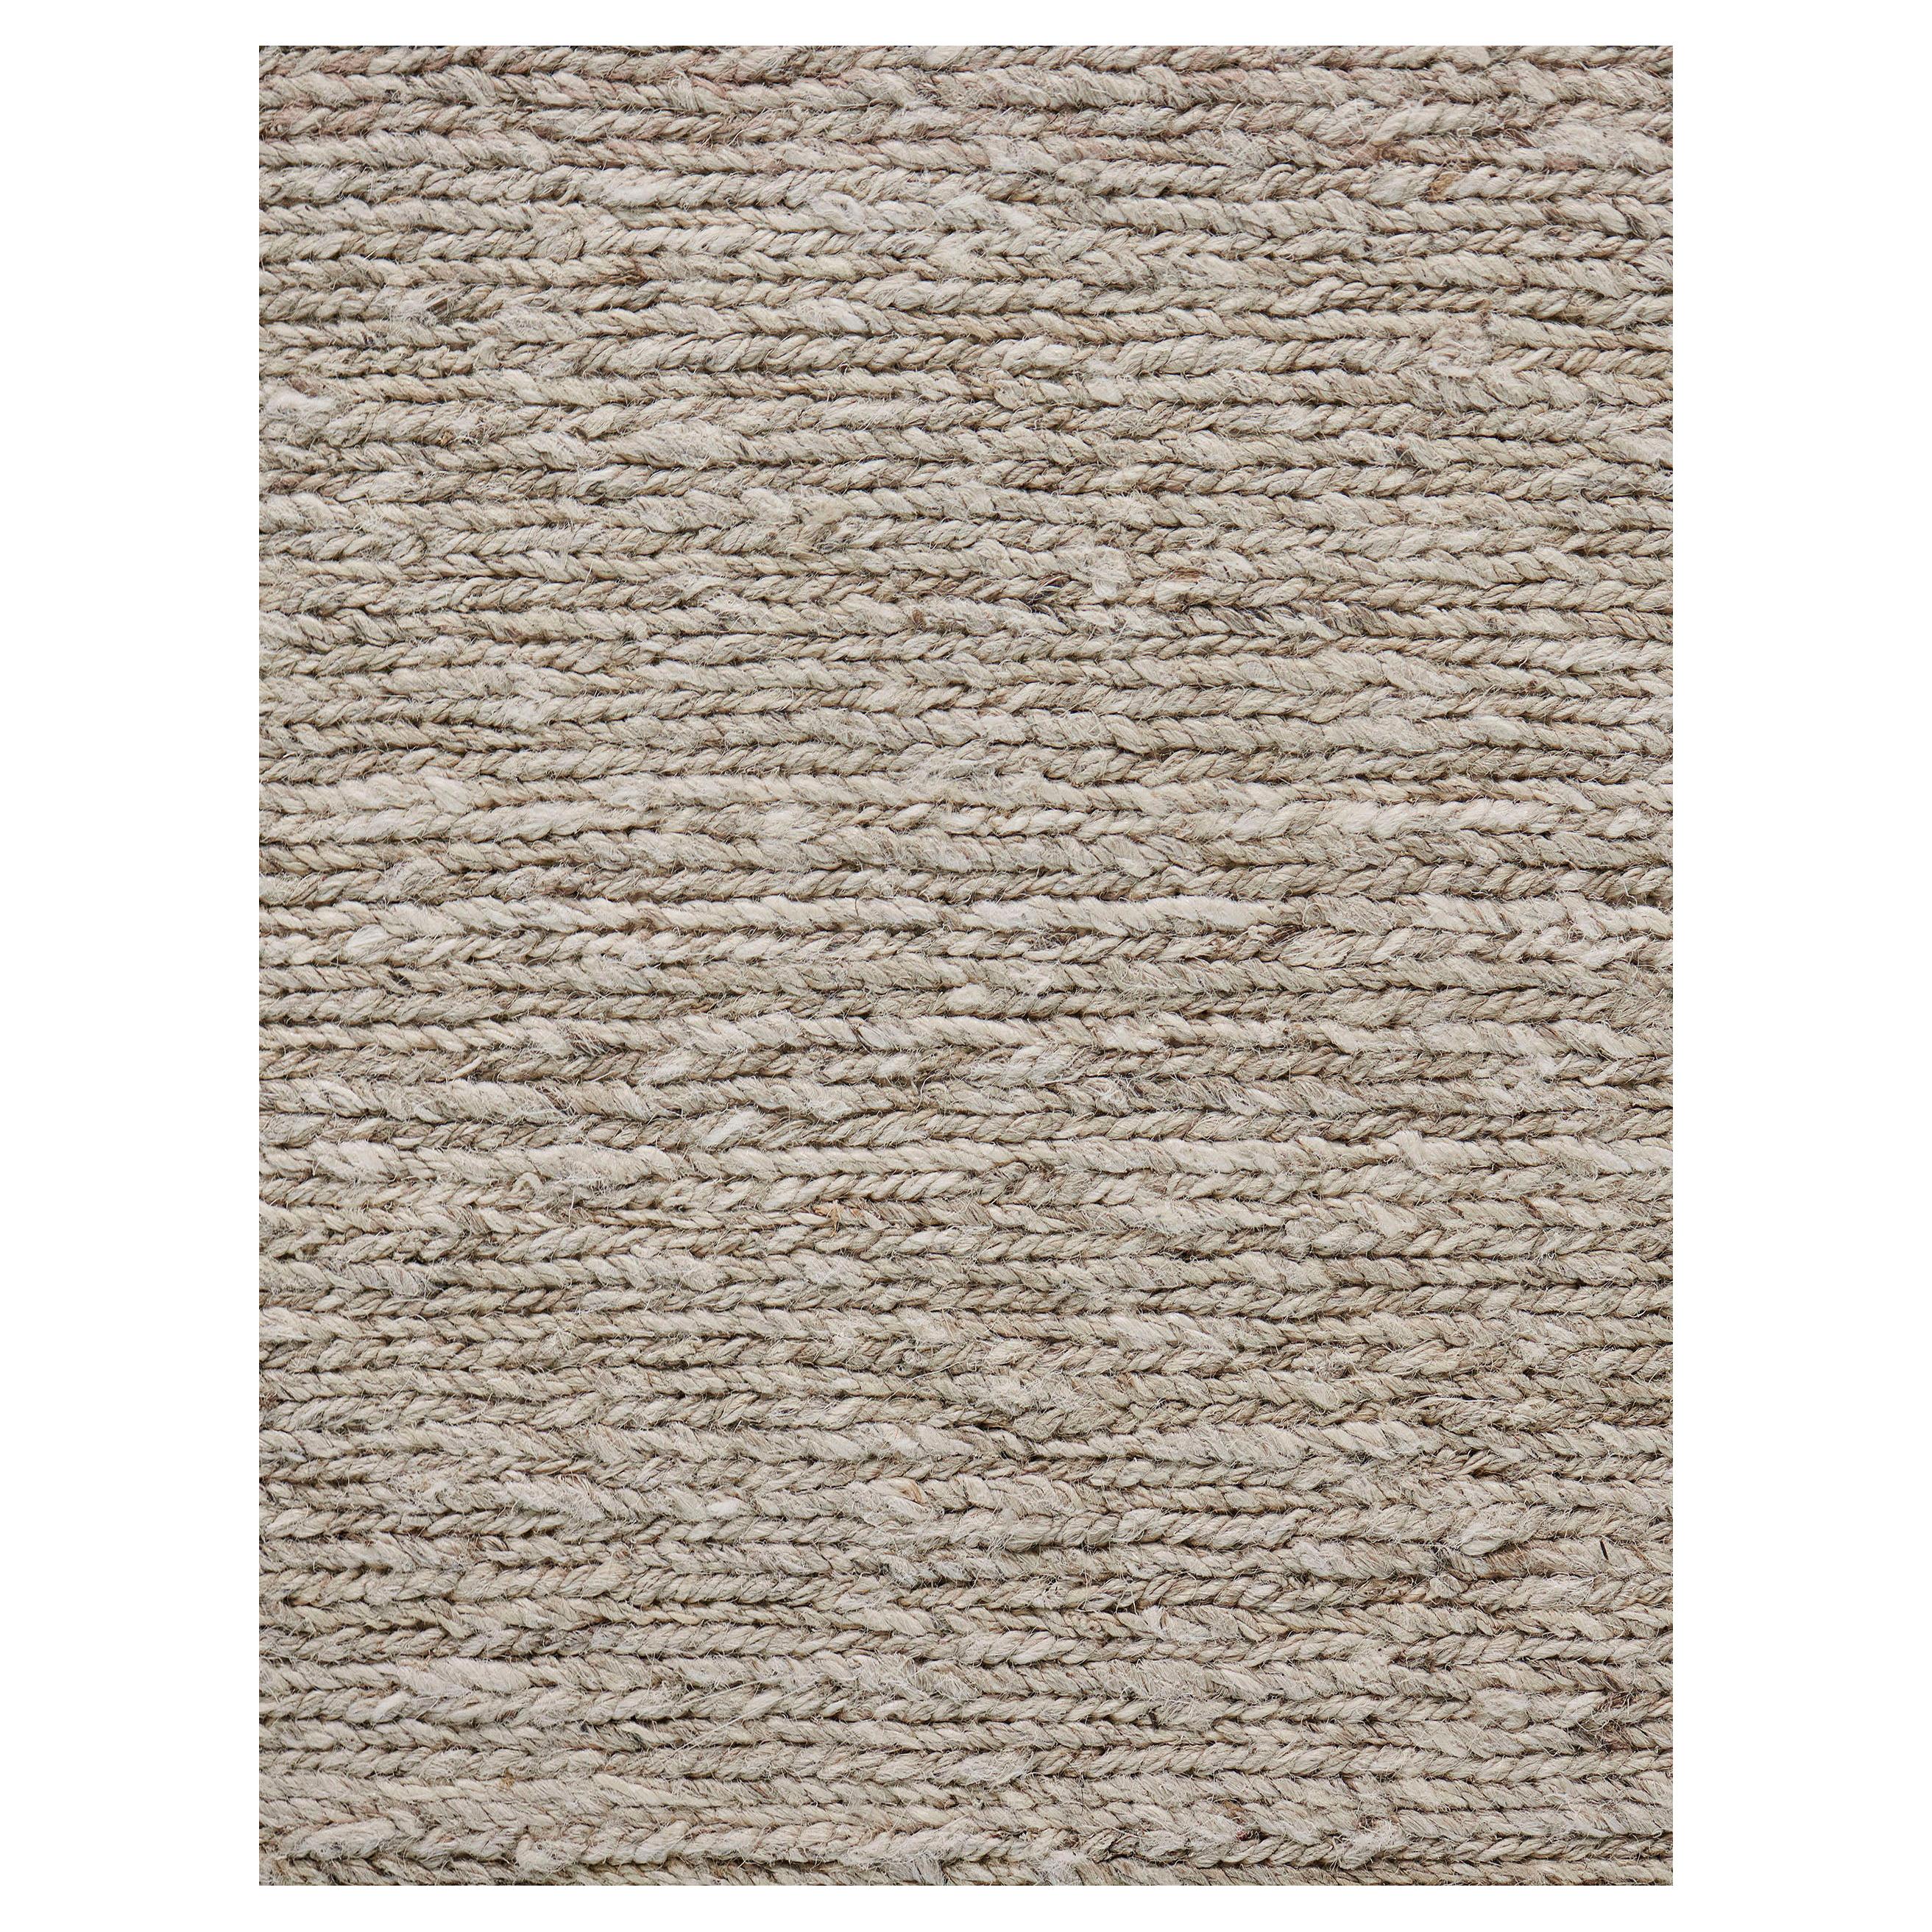 Handwoven Textured Area Rug For Sale